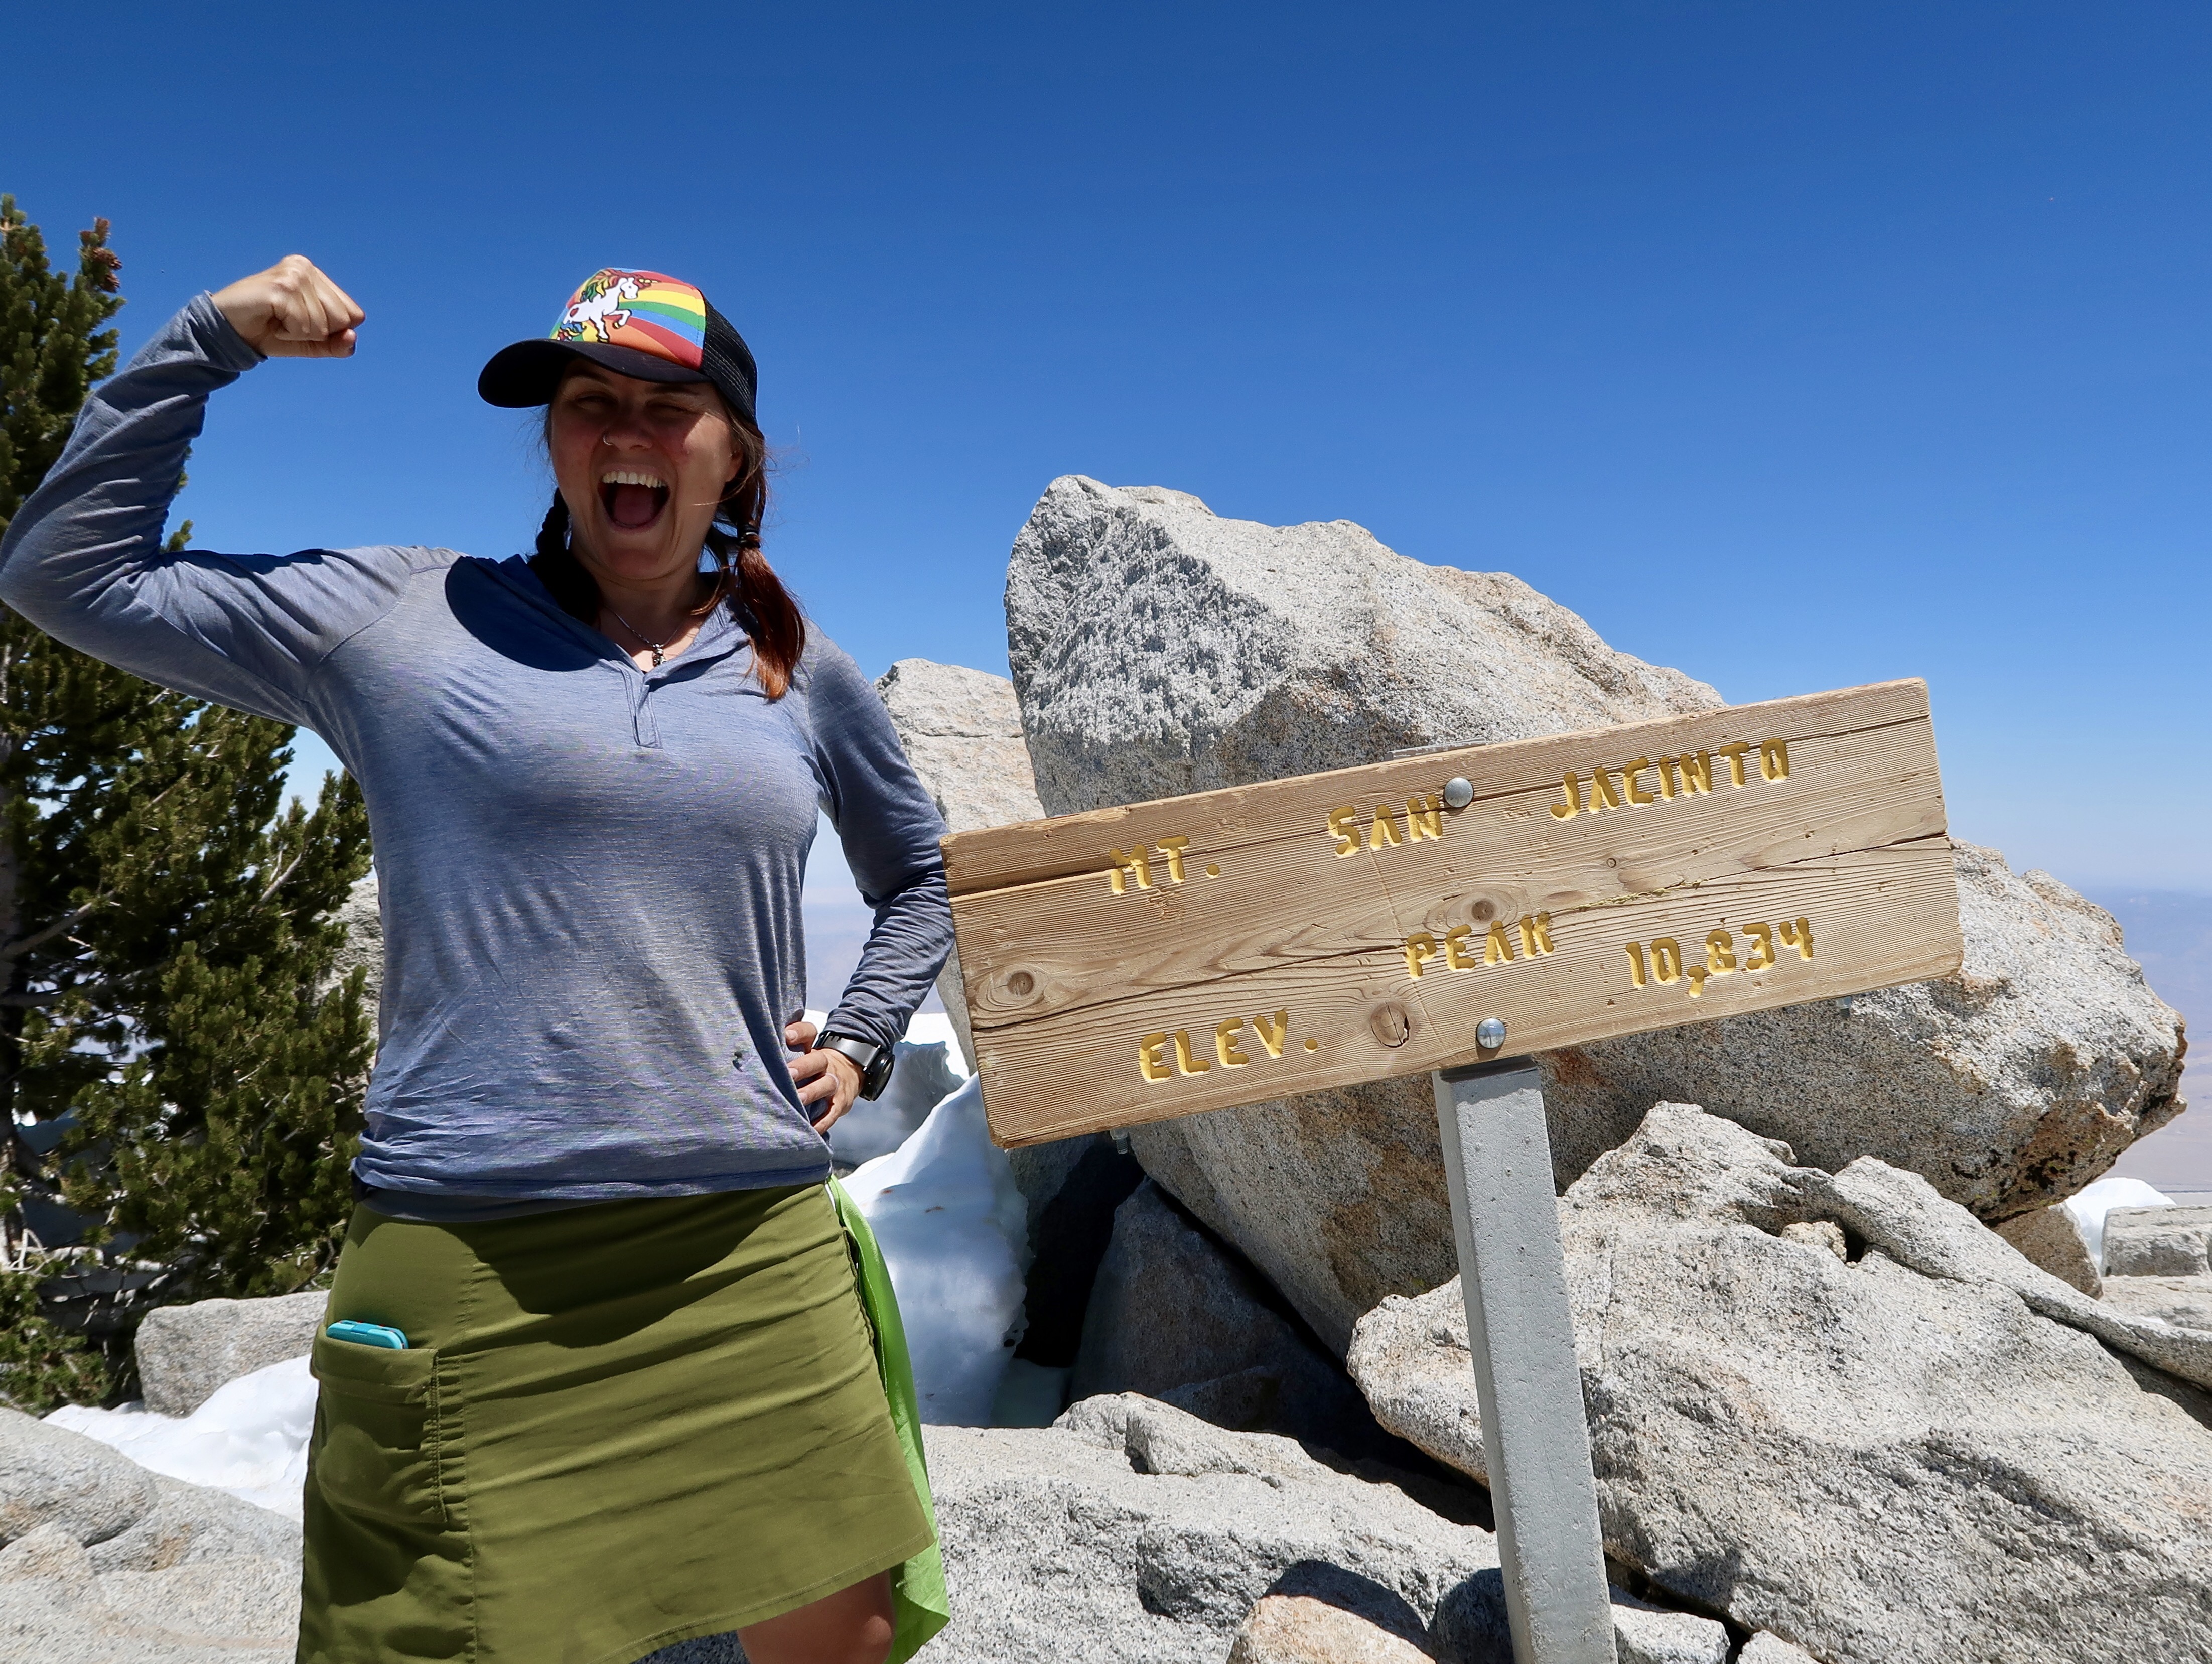 Pacific Crest Trail Day 19 – In Which Unicorn Summits Mt. San Jacinto